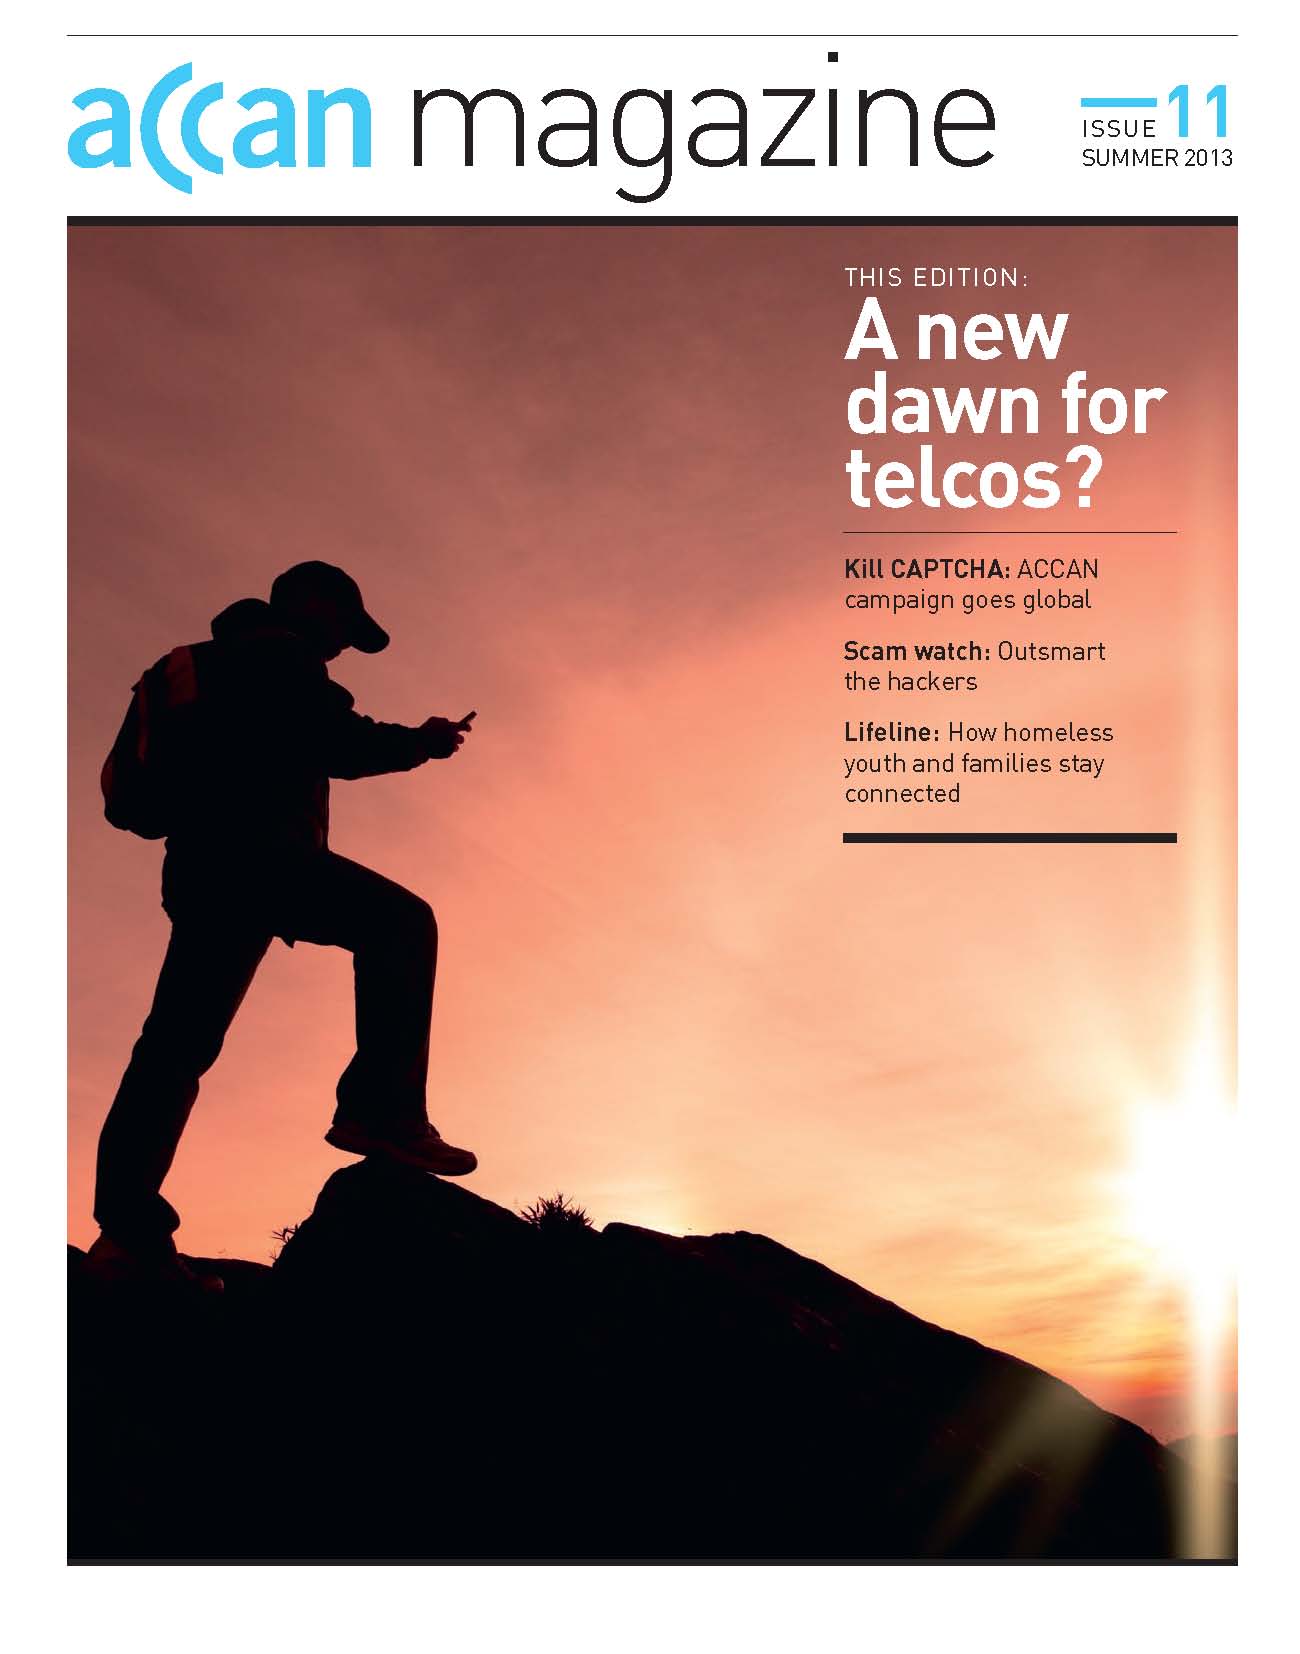 Front cover of Summer 2013 ACCAN Magazine. Picture used is silhouette of man holding mobile phone.